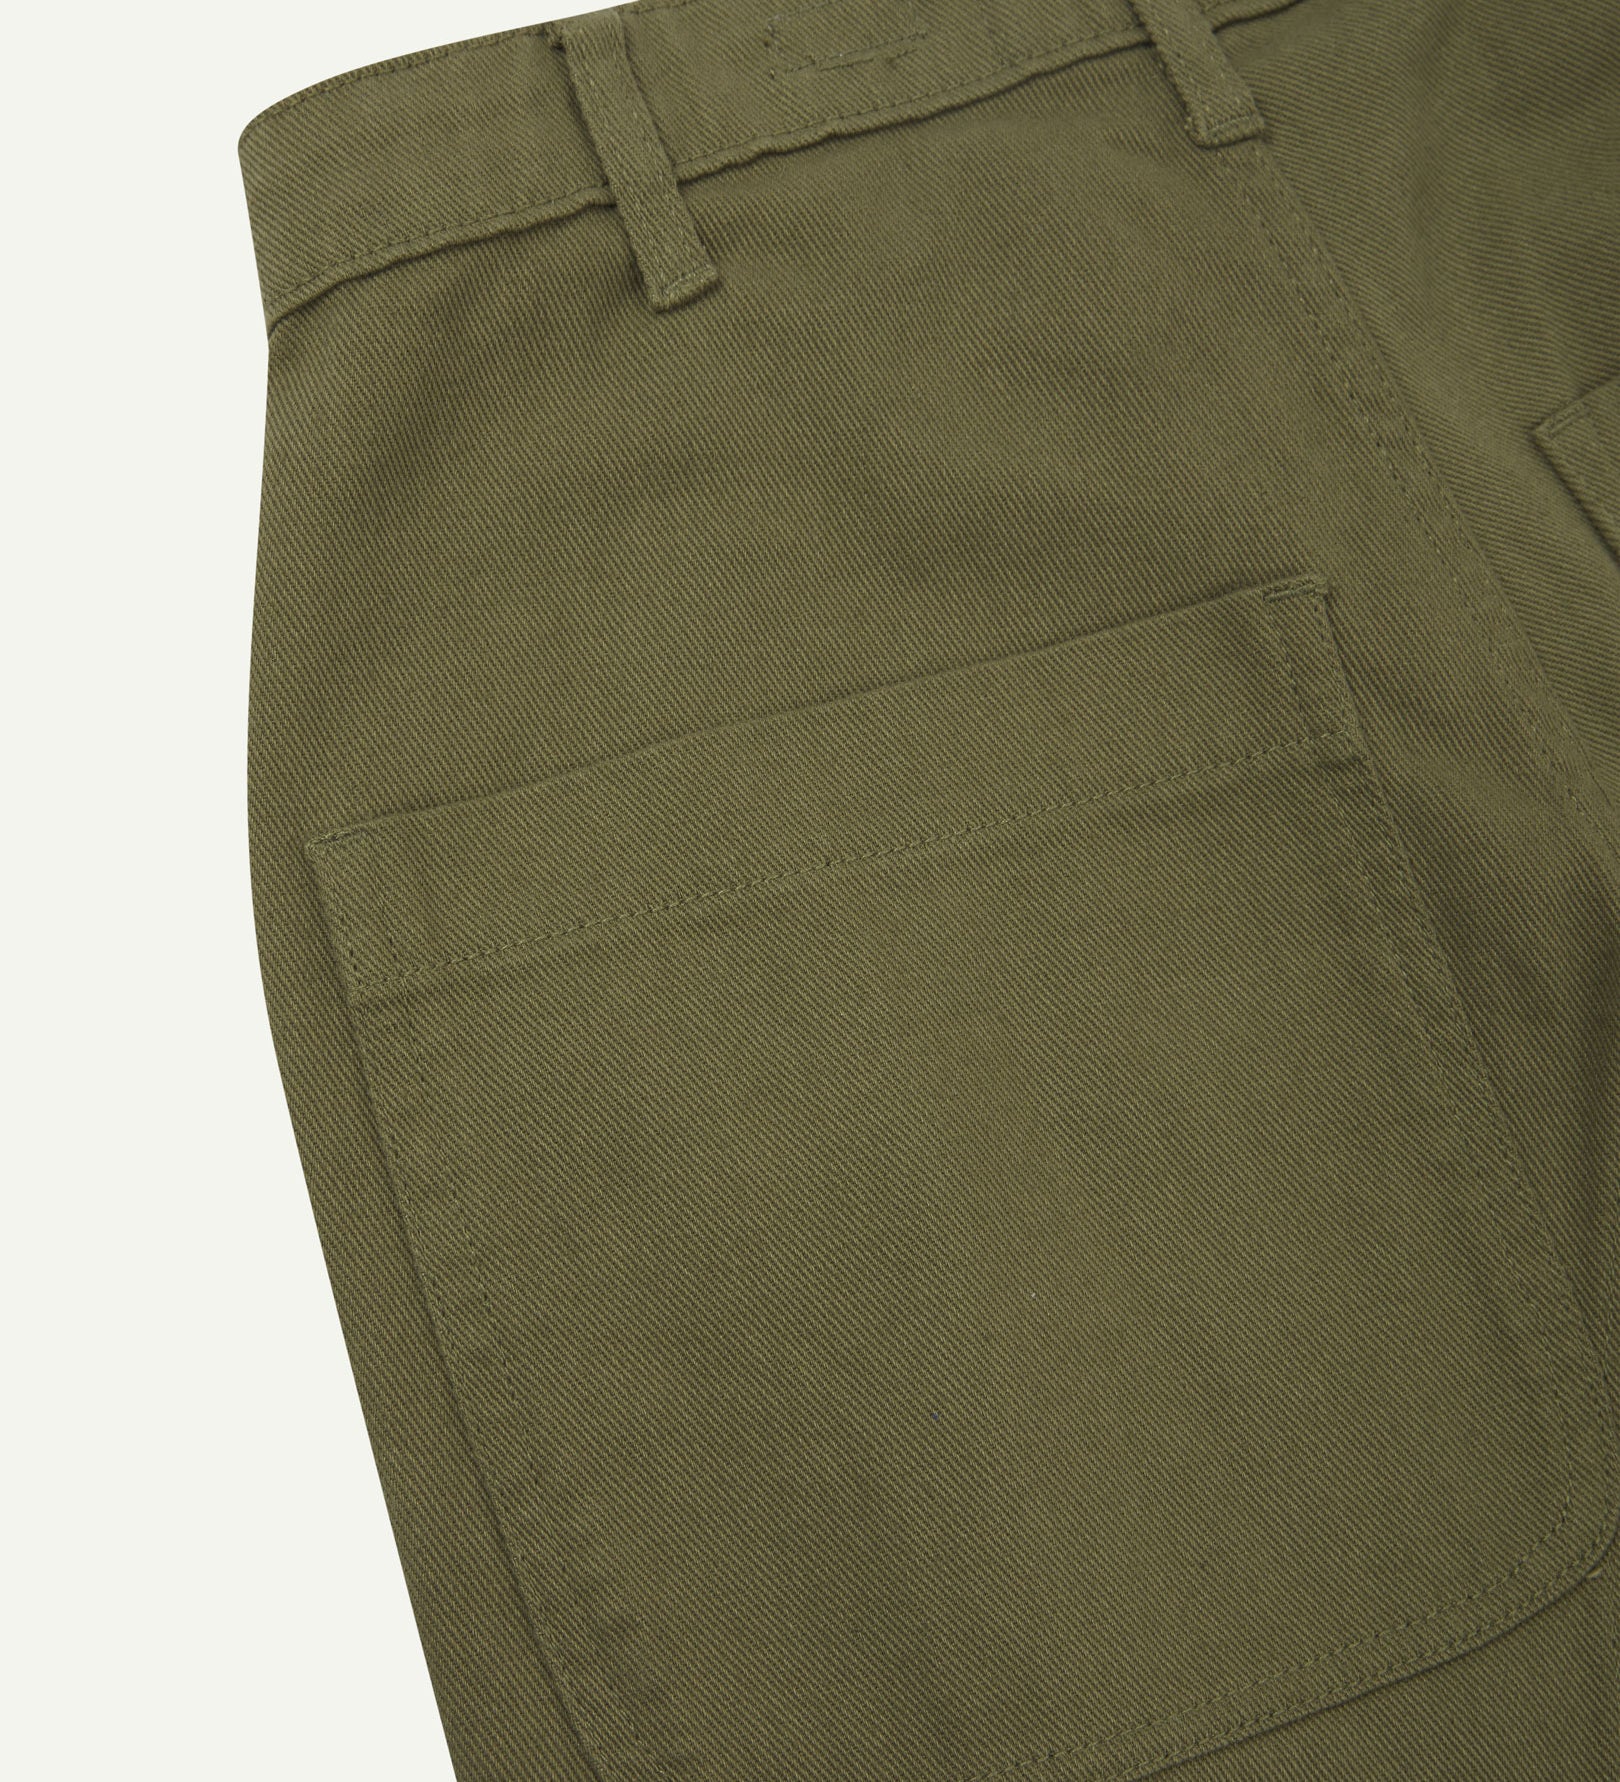 Close-up reverse view of Uskees moss green heavyweight drill work pants with focus on left rear pocket and belt loops.